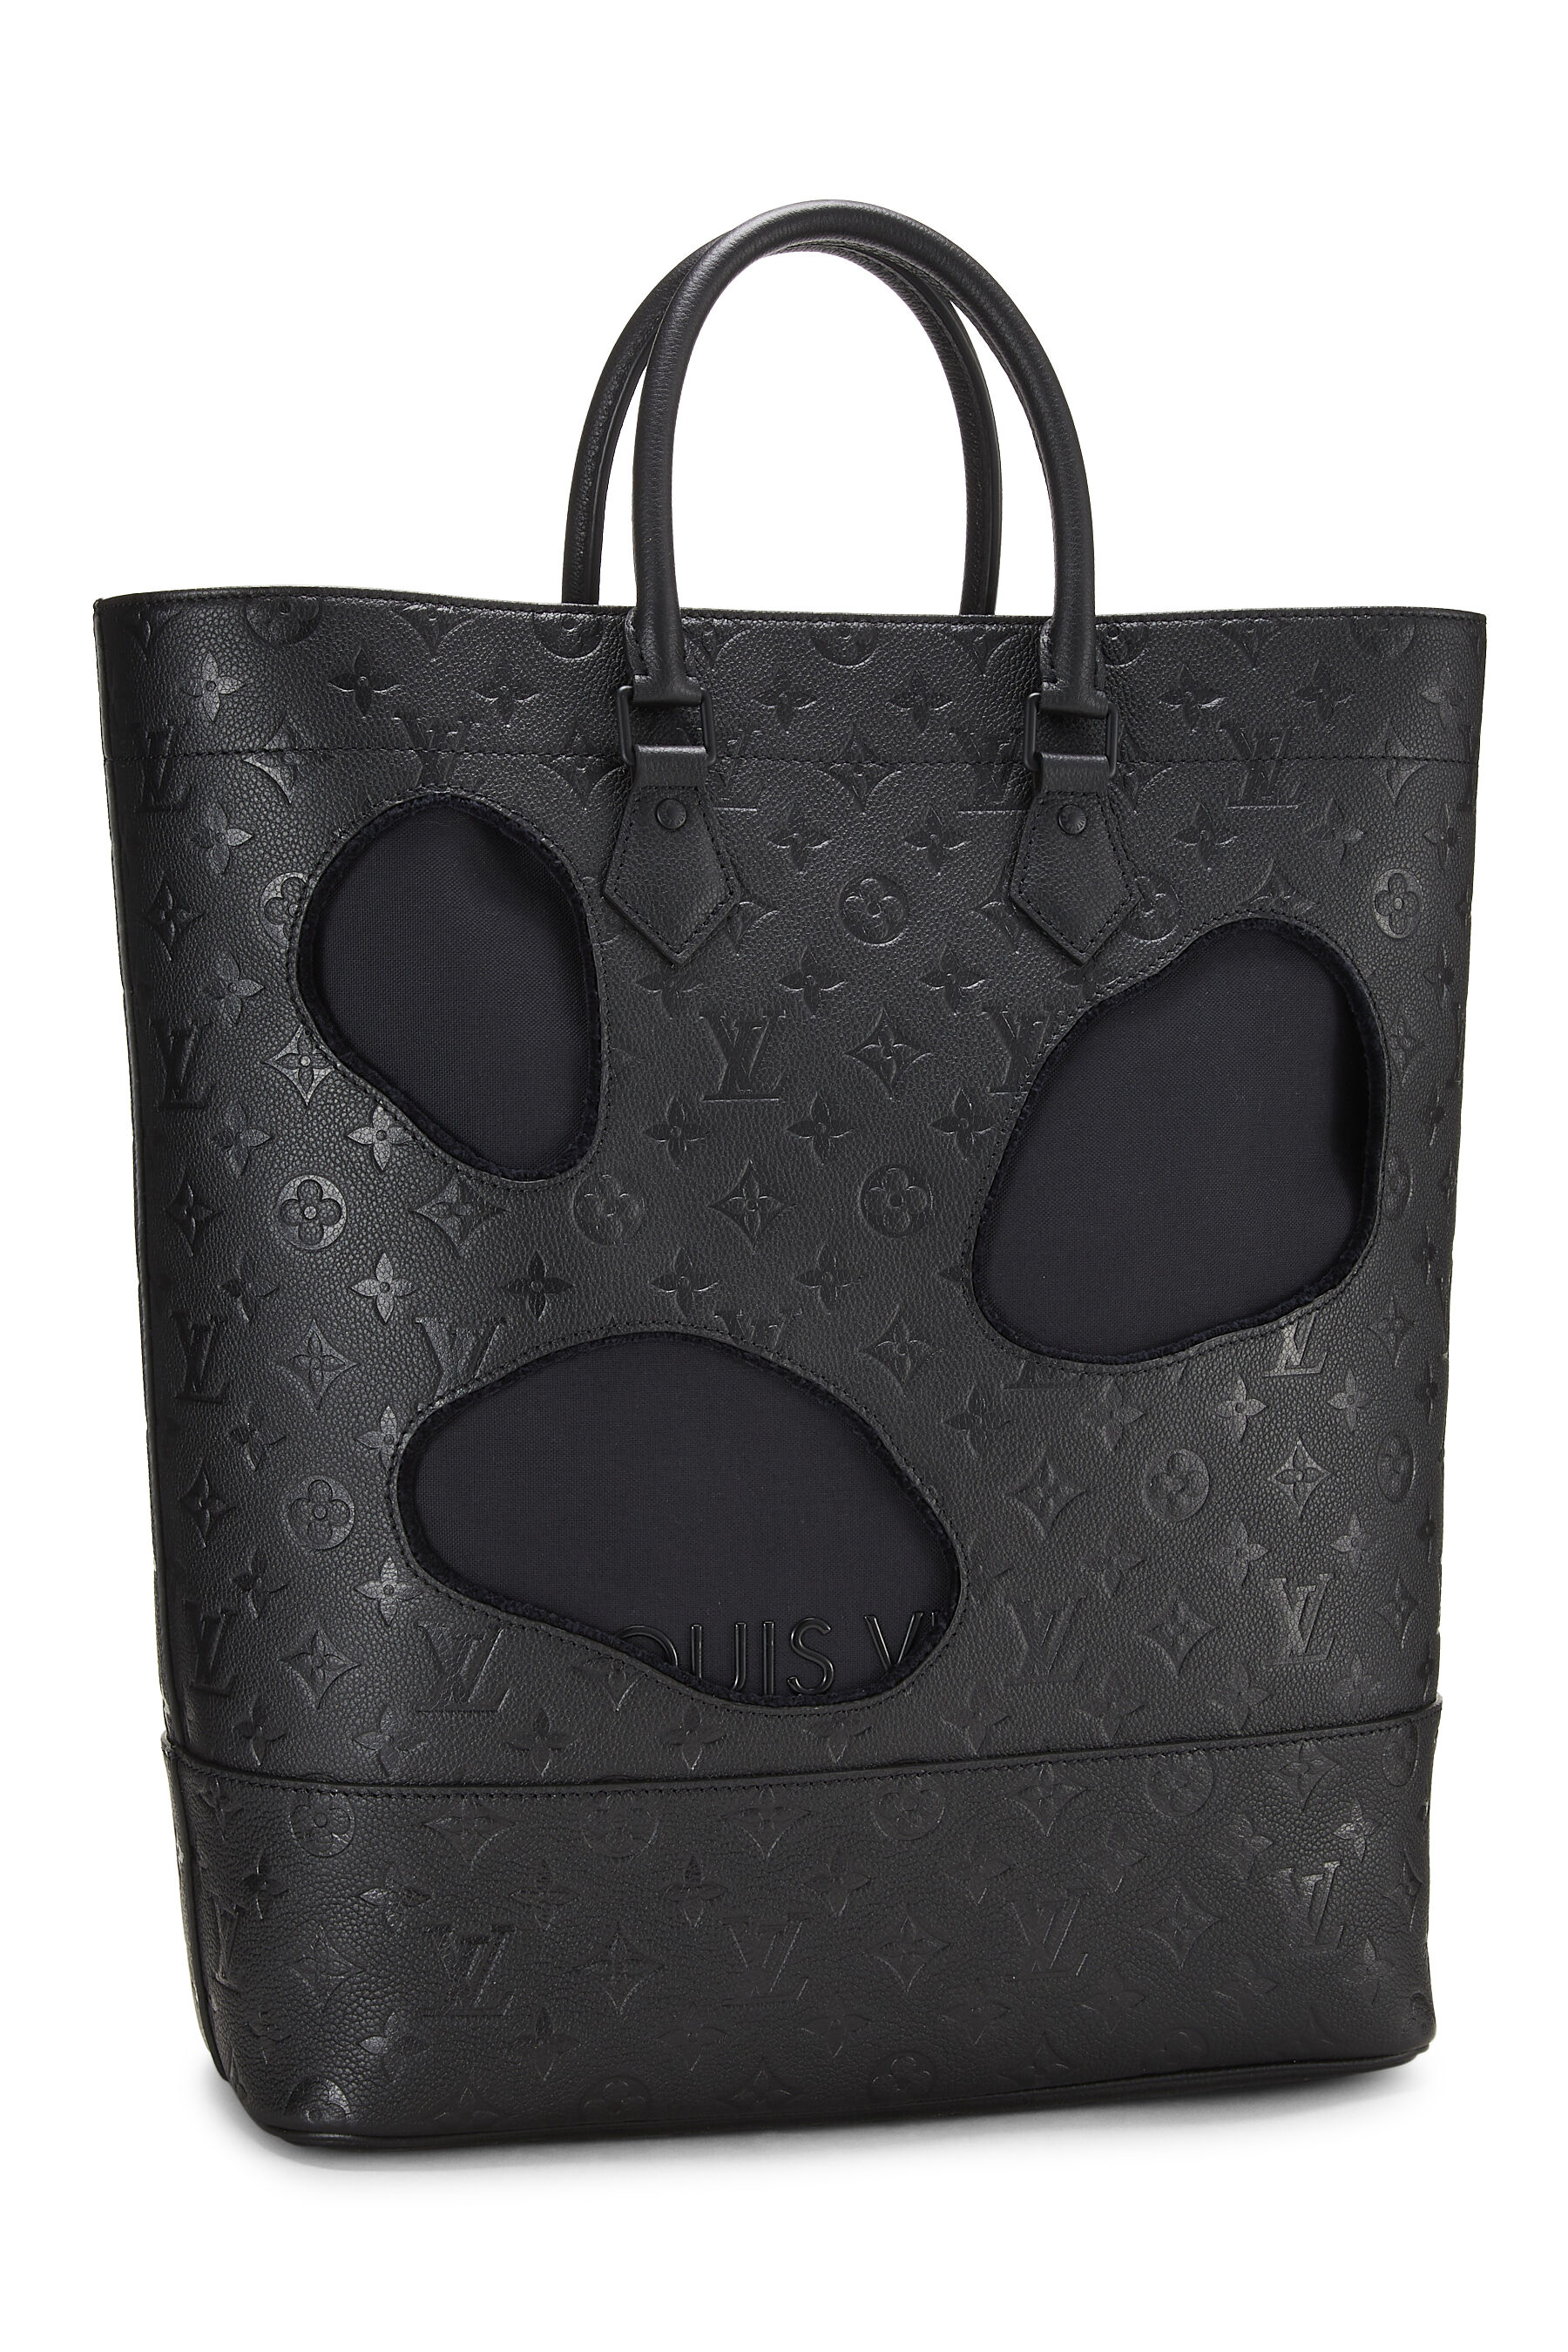 This Louis Vuitton Bag With Giant Holes By Rei Kawakubo of Commes des  Garcons Can Be Yours Now For The Low, Low Price Of $2,790